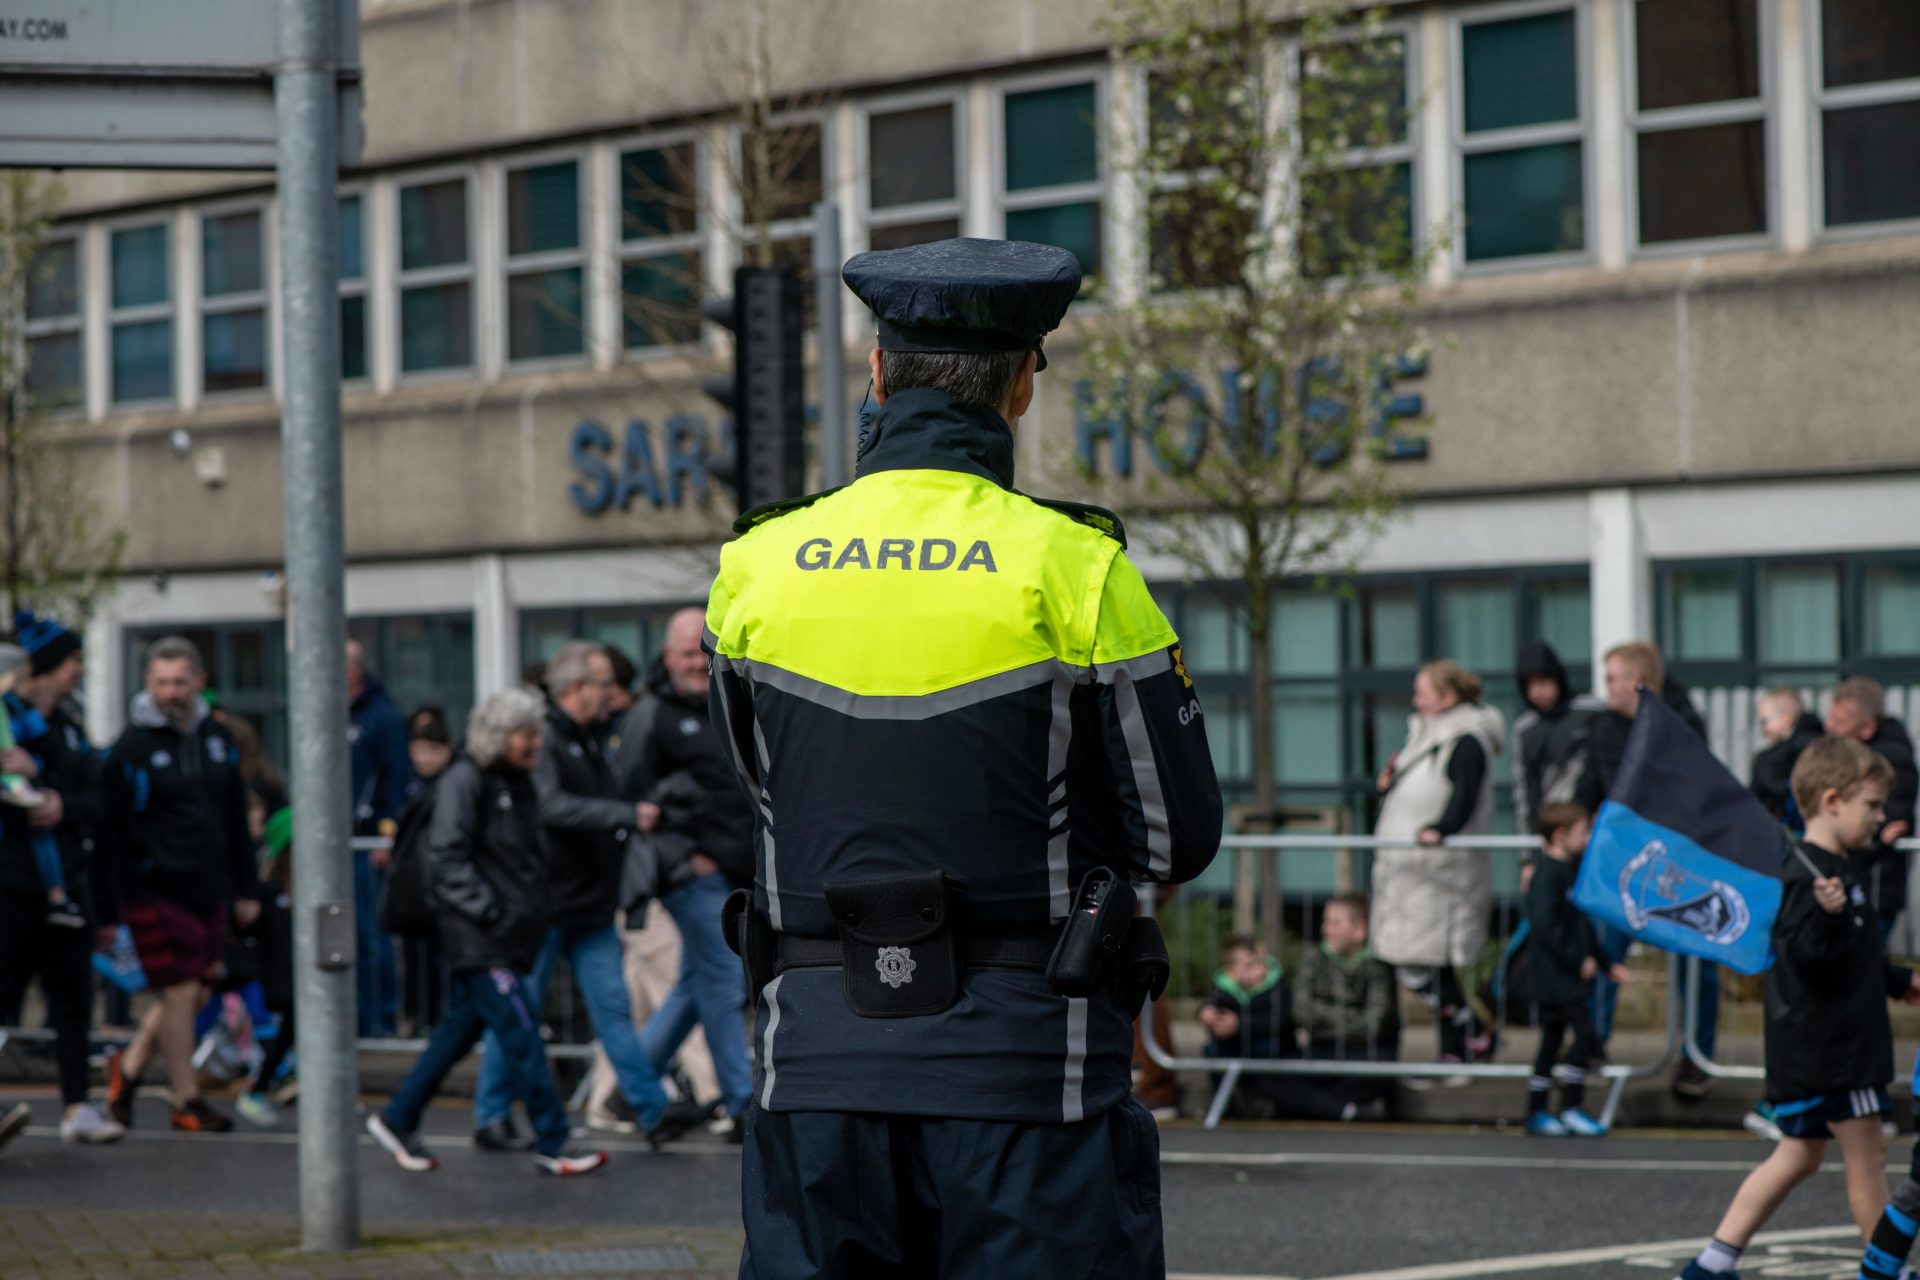 Low Garda numbers have led to a "tidal wave" of anti-social behaviour in Limerick